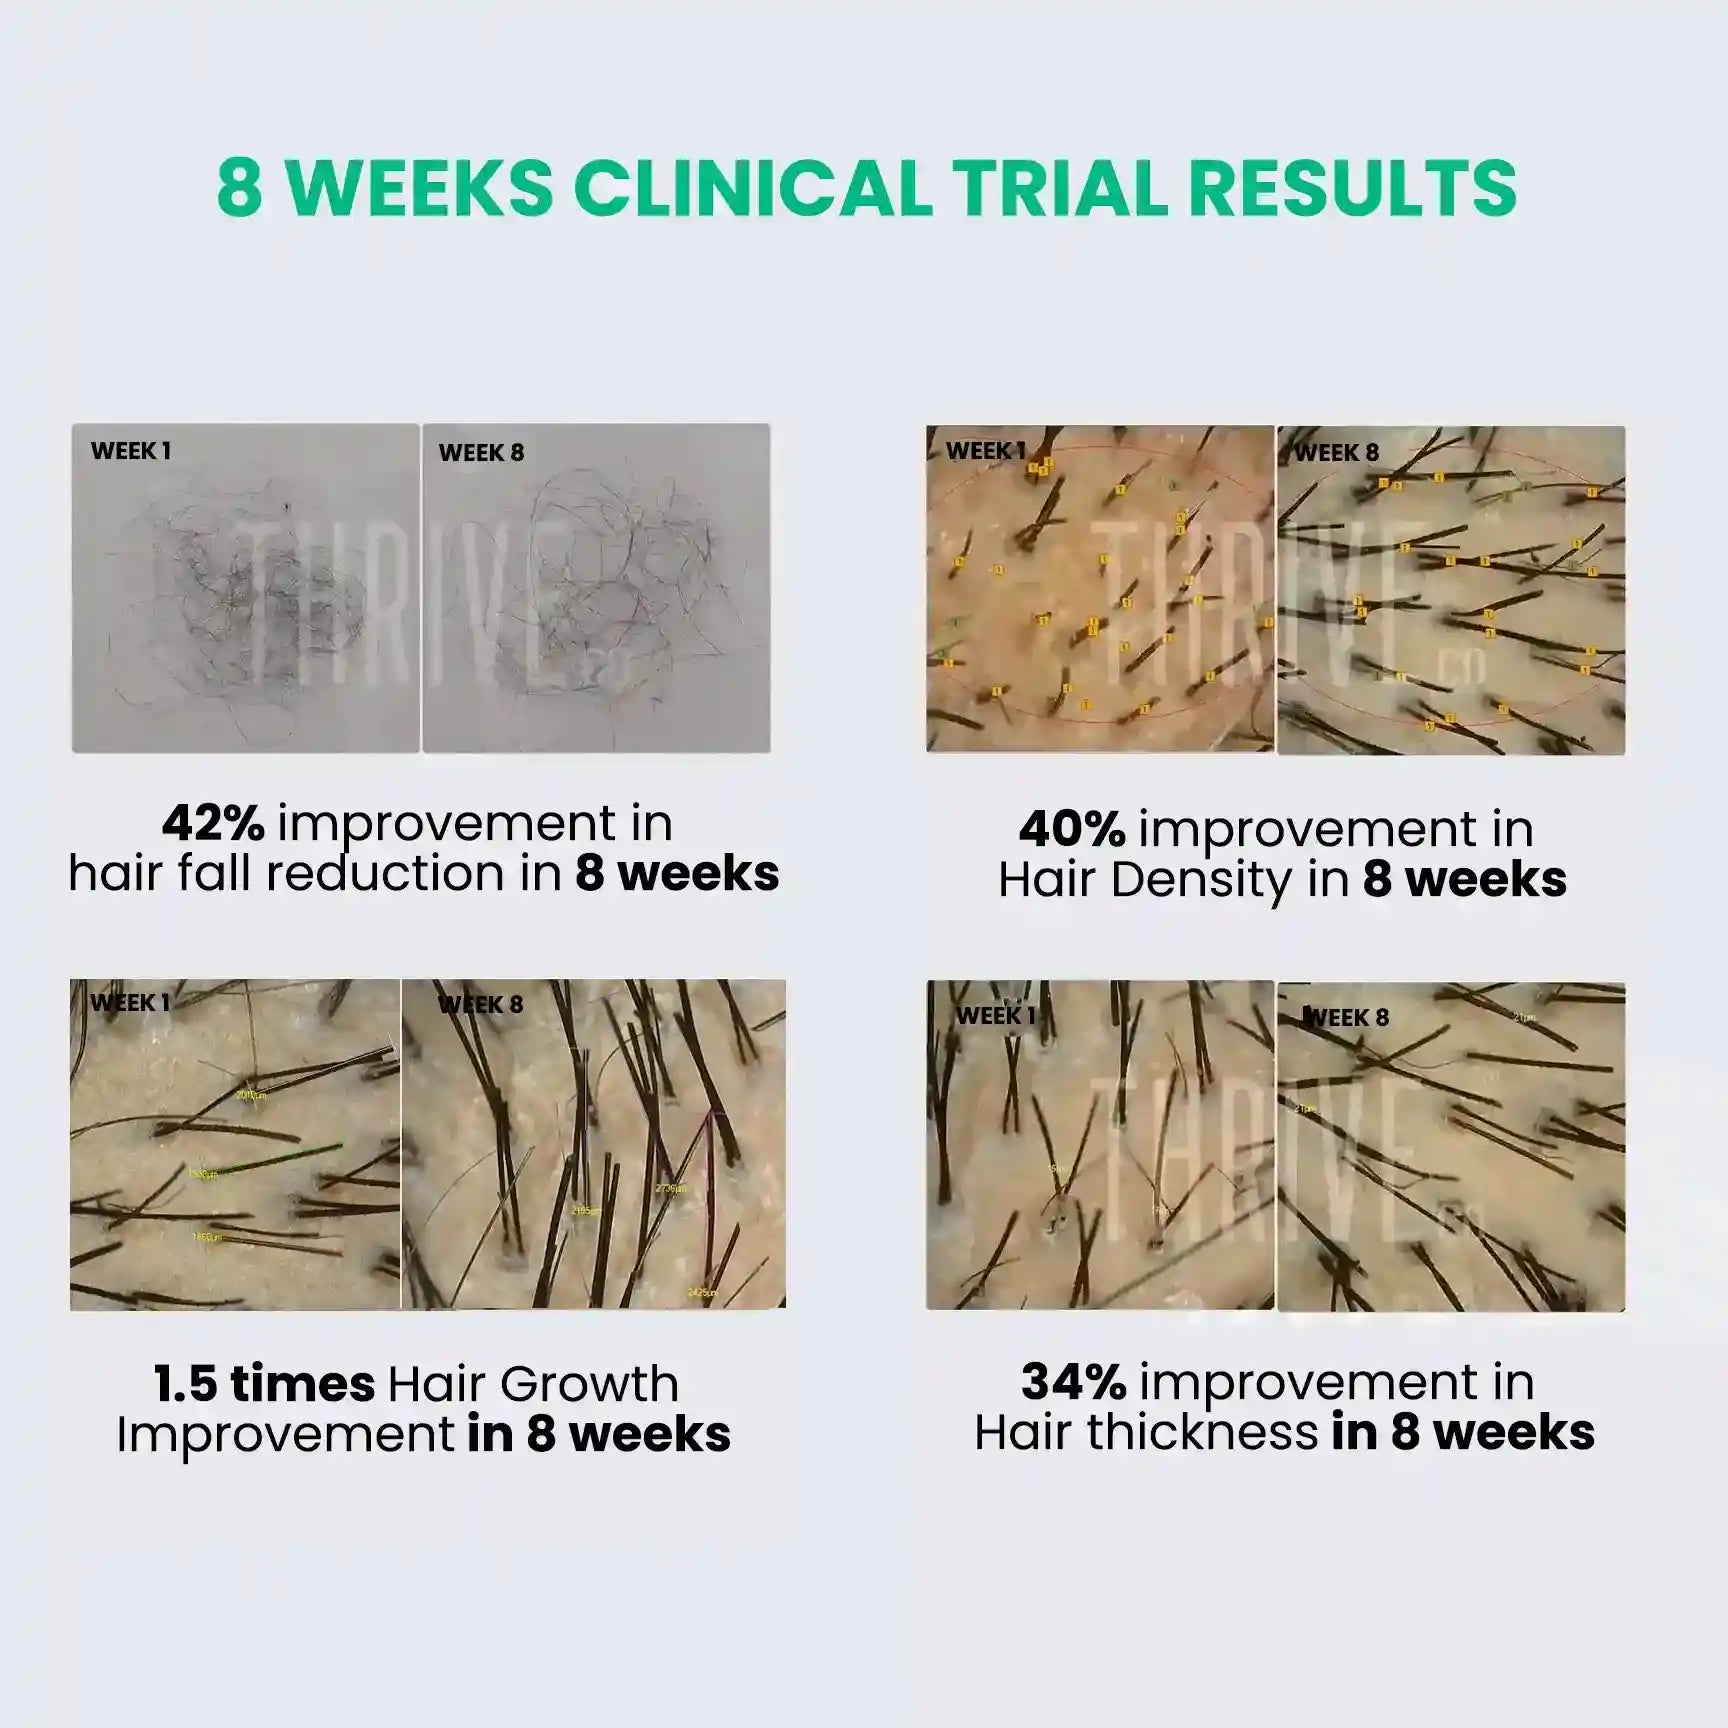 8 weeks clinical trail results of thriveco hair growth serum